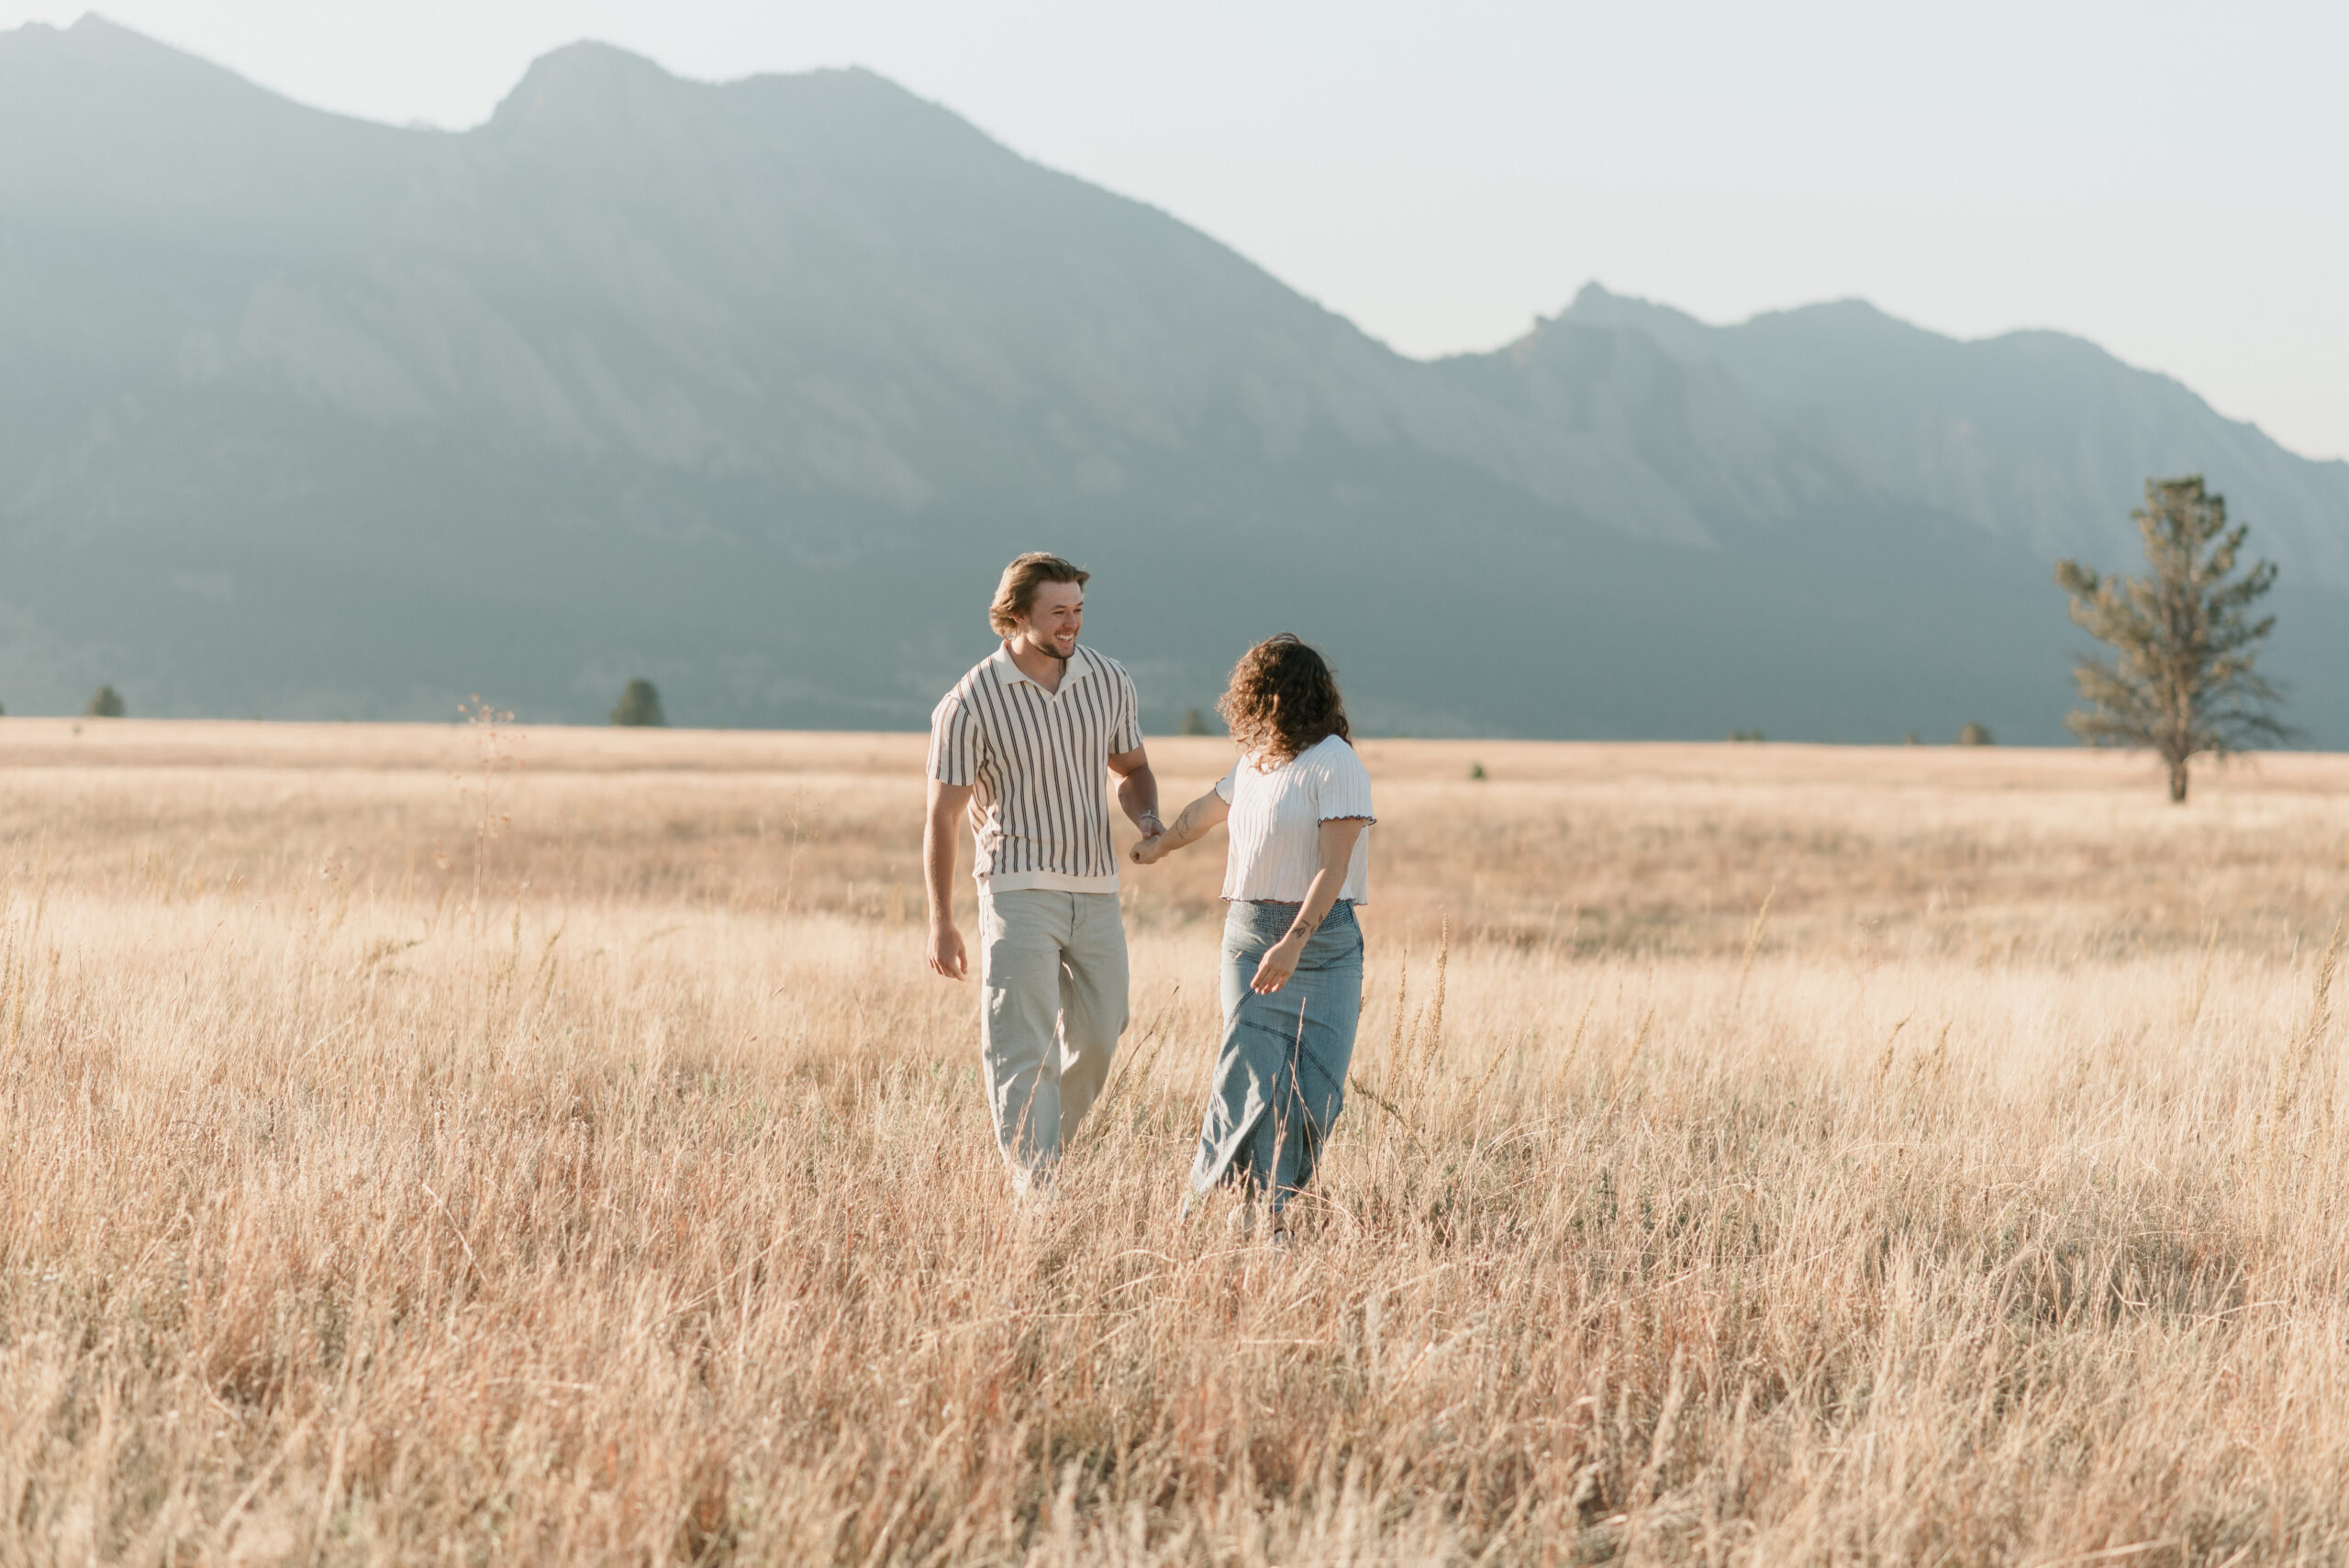 couple walking through the grass field together with mountains in the background during their couples photoshoot 